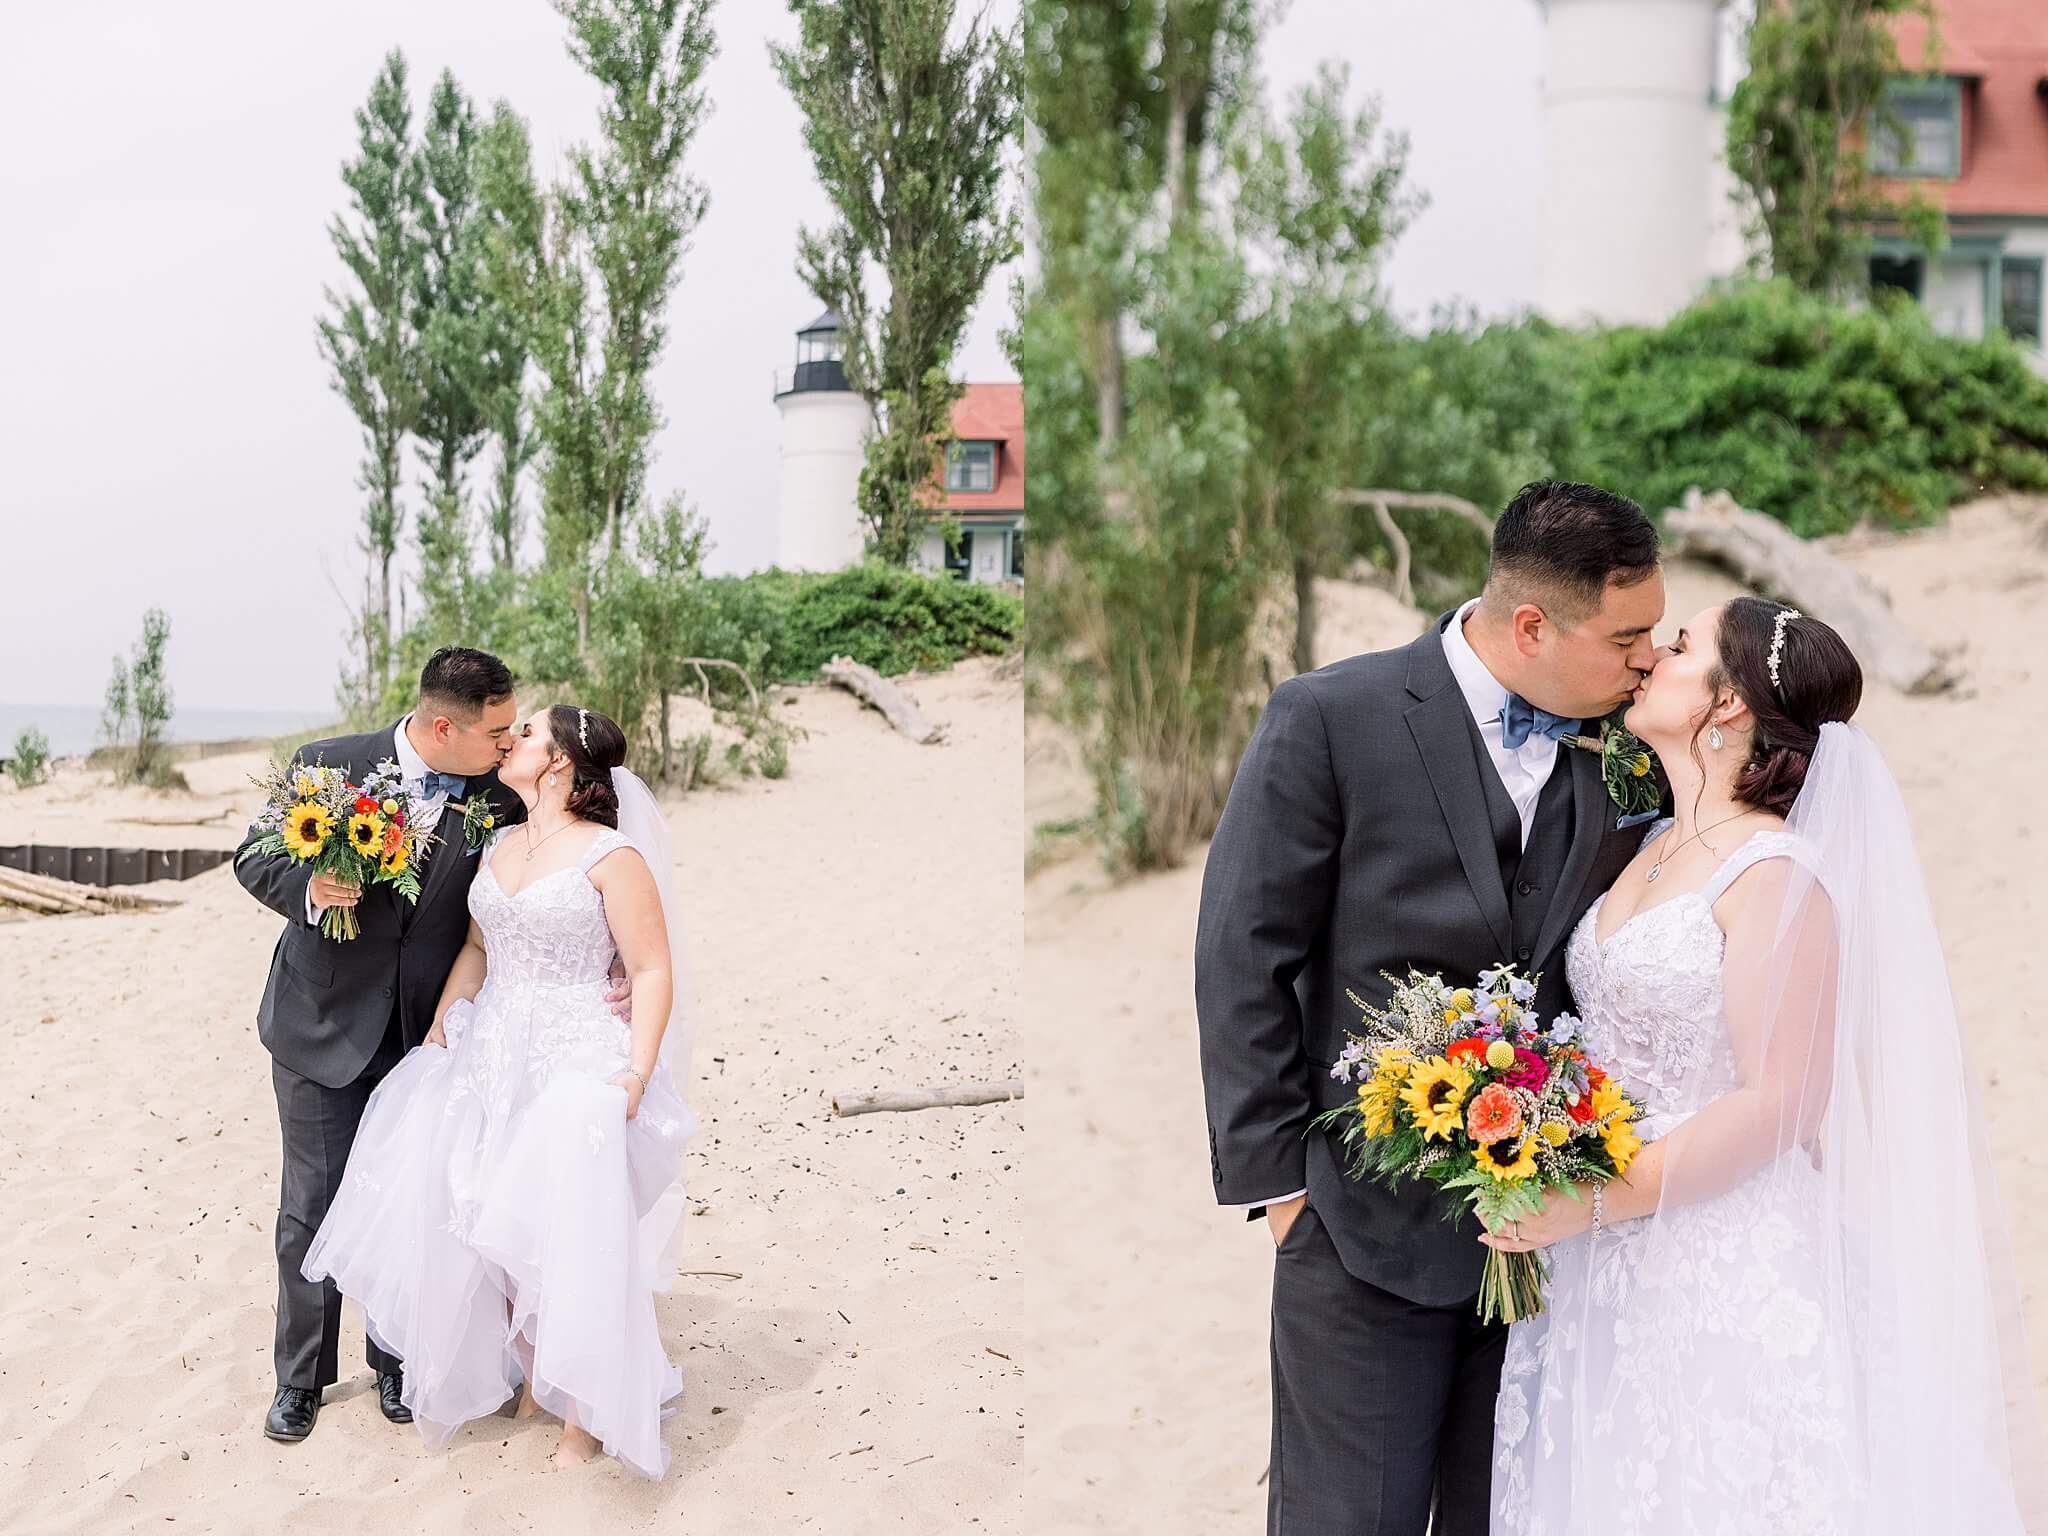 Bride and groom share a kiss before there Elberta Life Saving Station wedding ceremony.